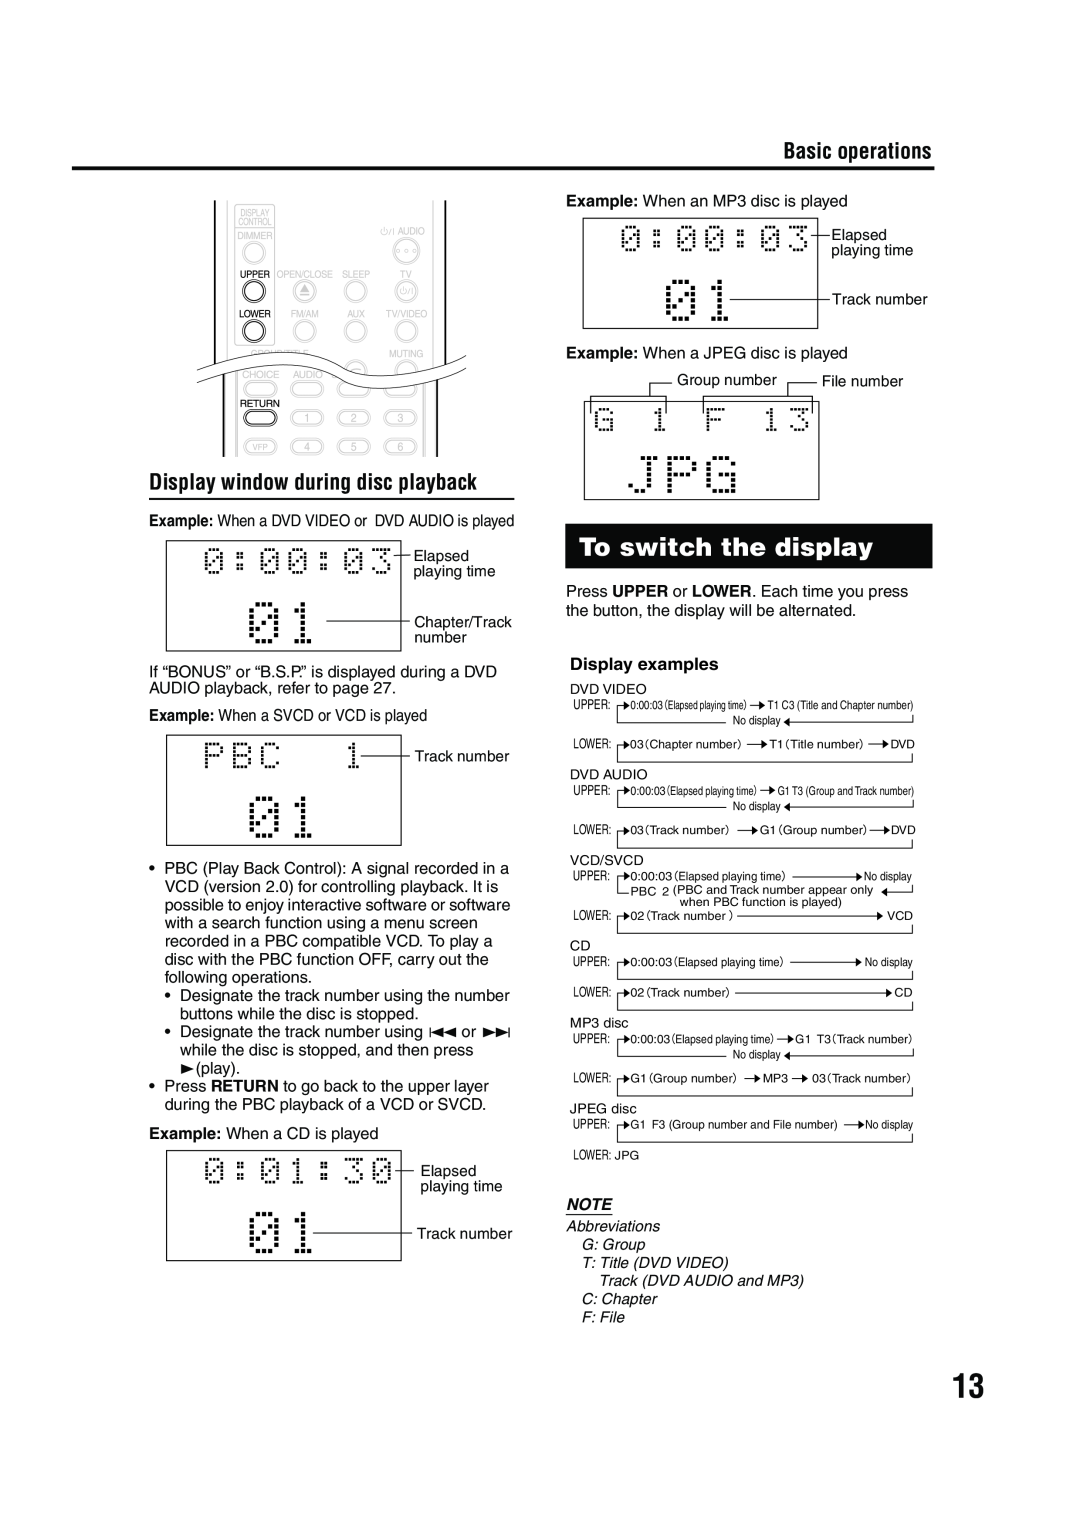 JVC LVT1284-004B manual To switch the display, Display window during disc playback, Basic operations 